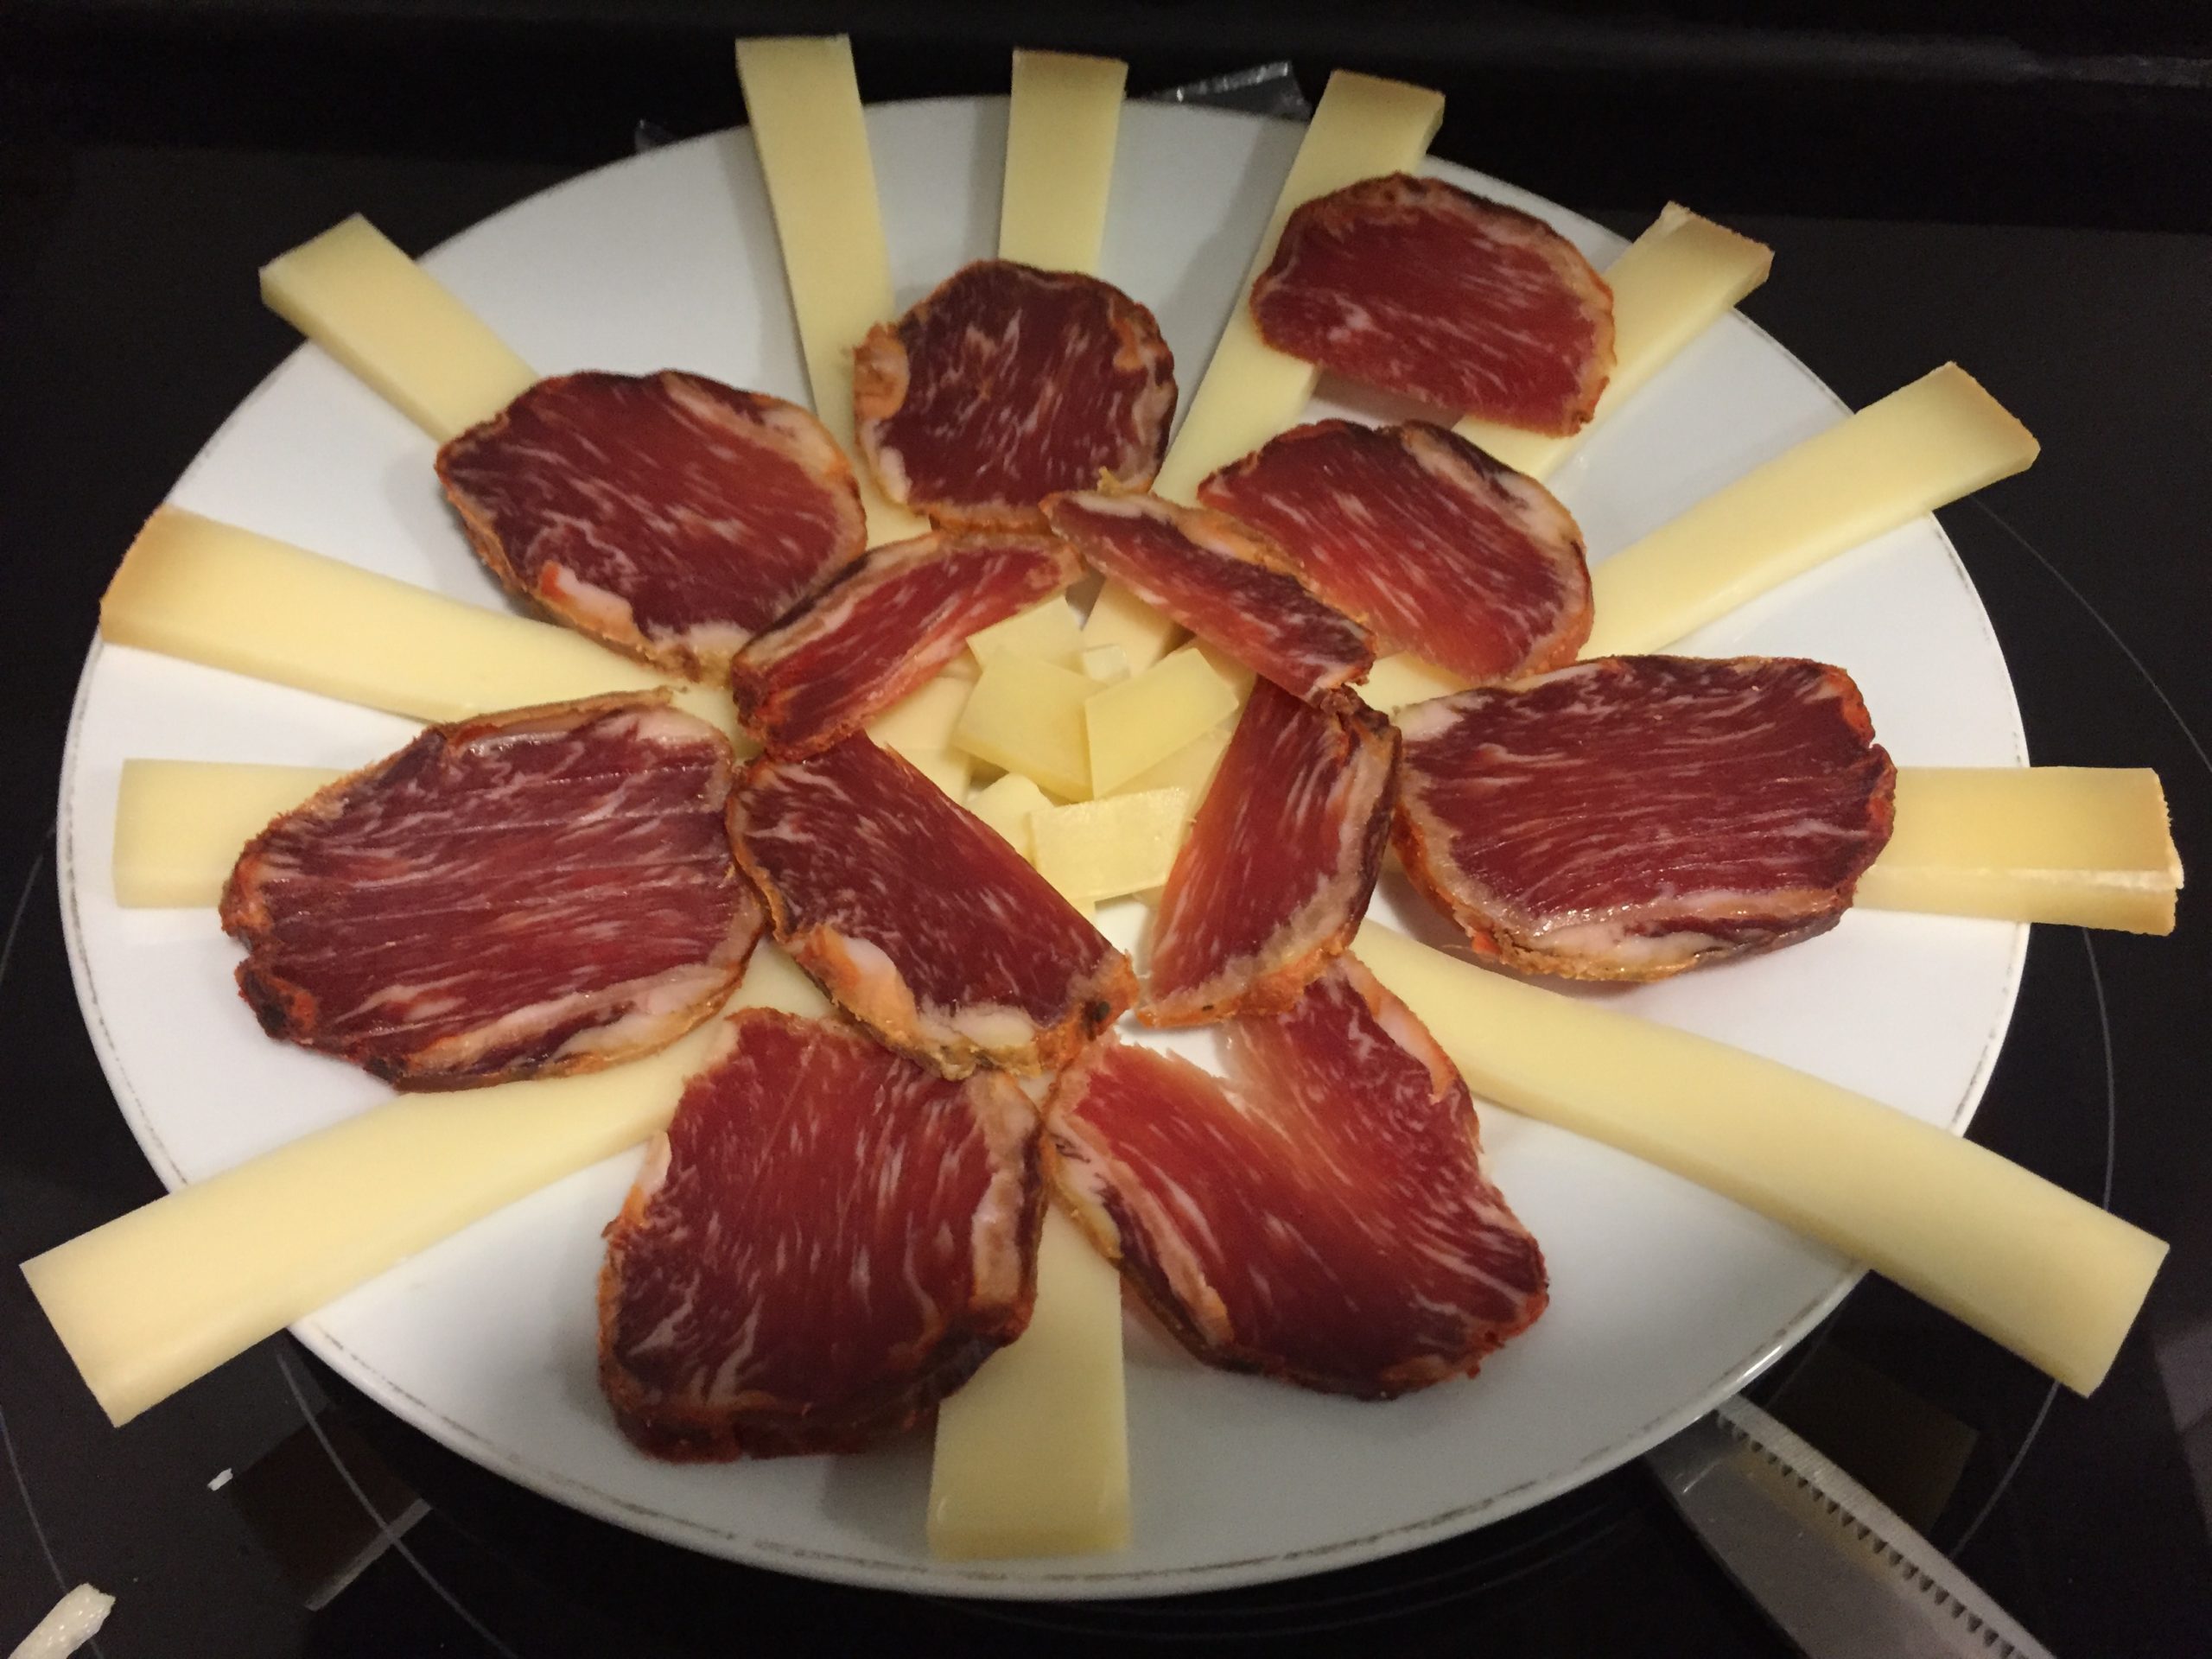 Delicious Iberian lomo and cheese